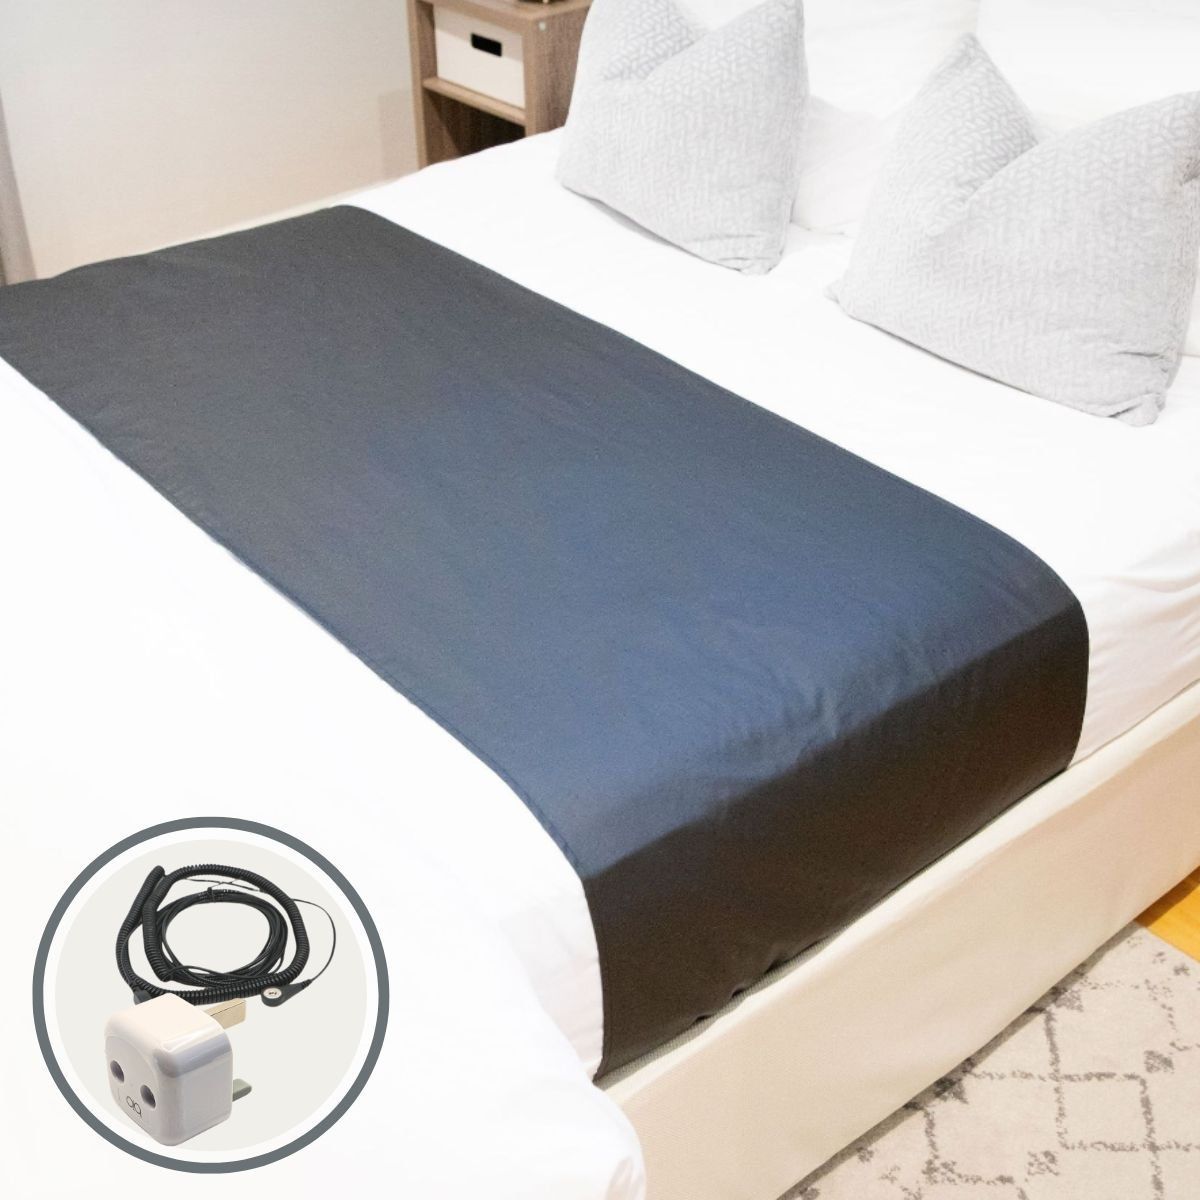 Earthing mat on bed